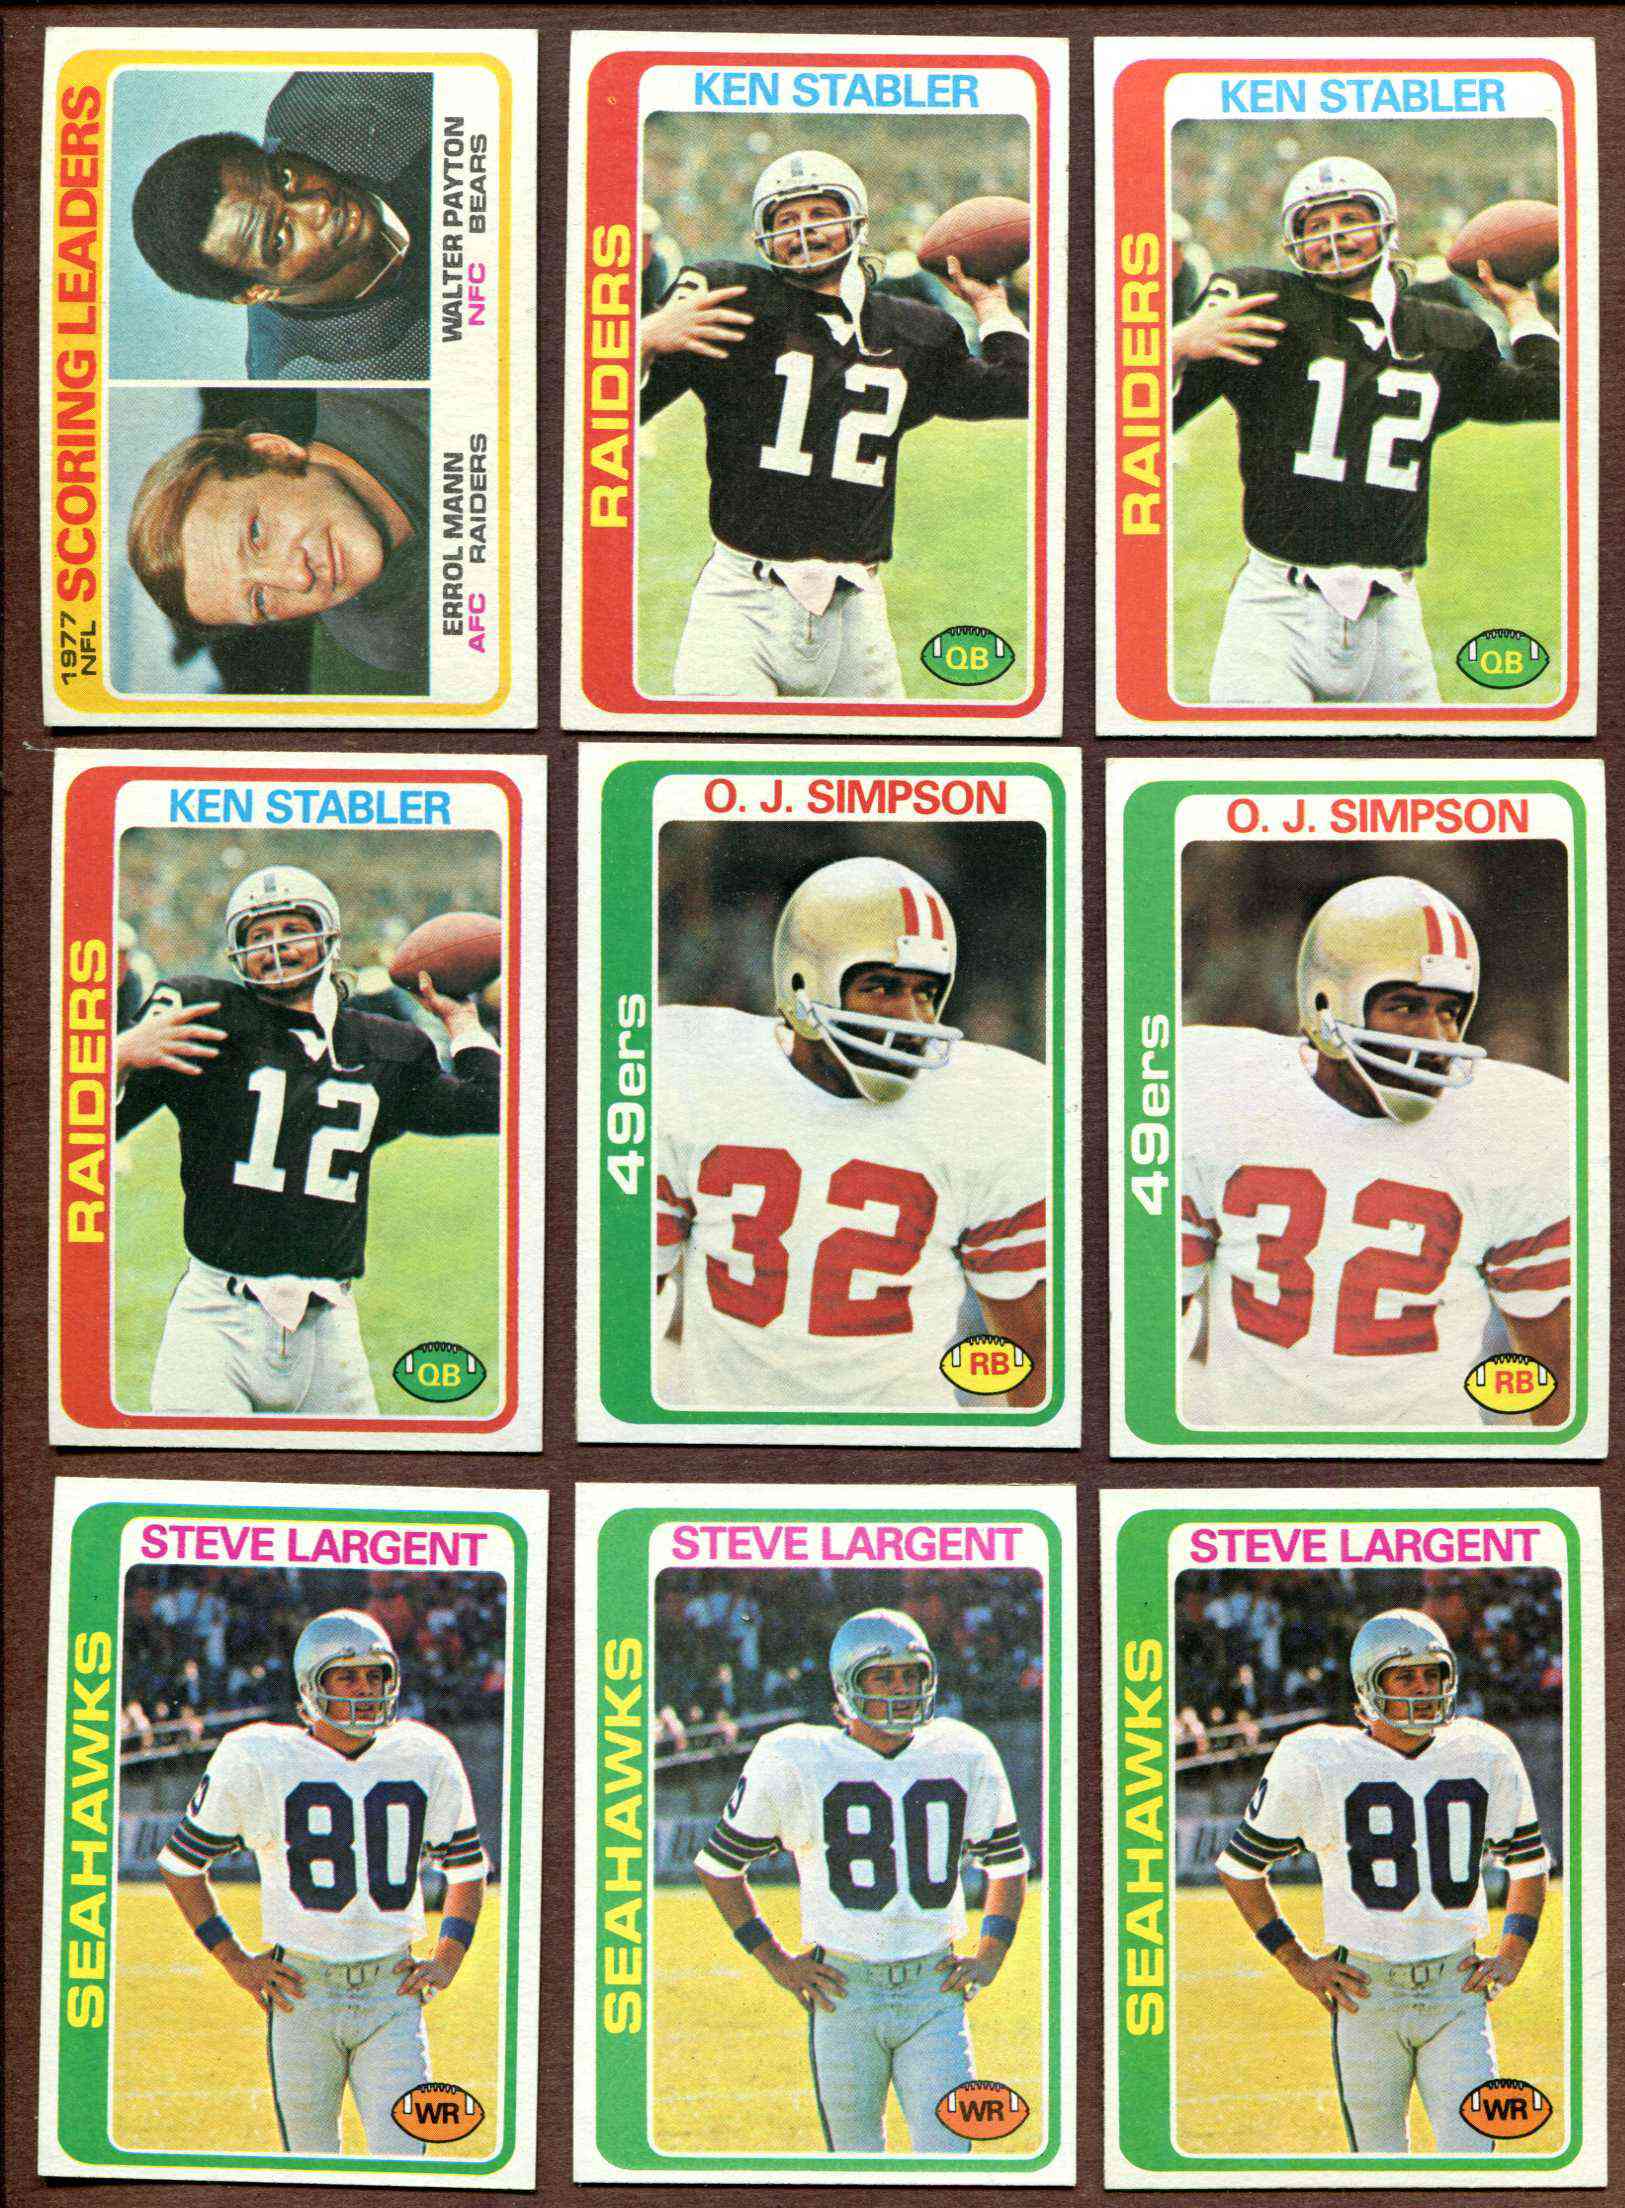 1978 Topps FB #443 Steve Largent (Seahawks,2nd year card) Football cards value